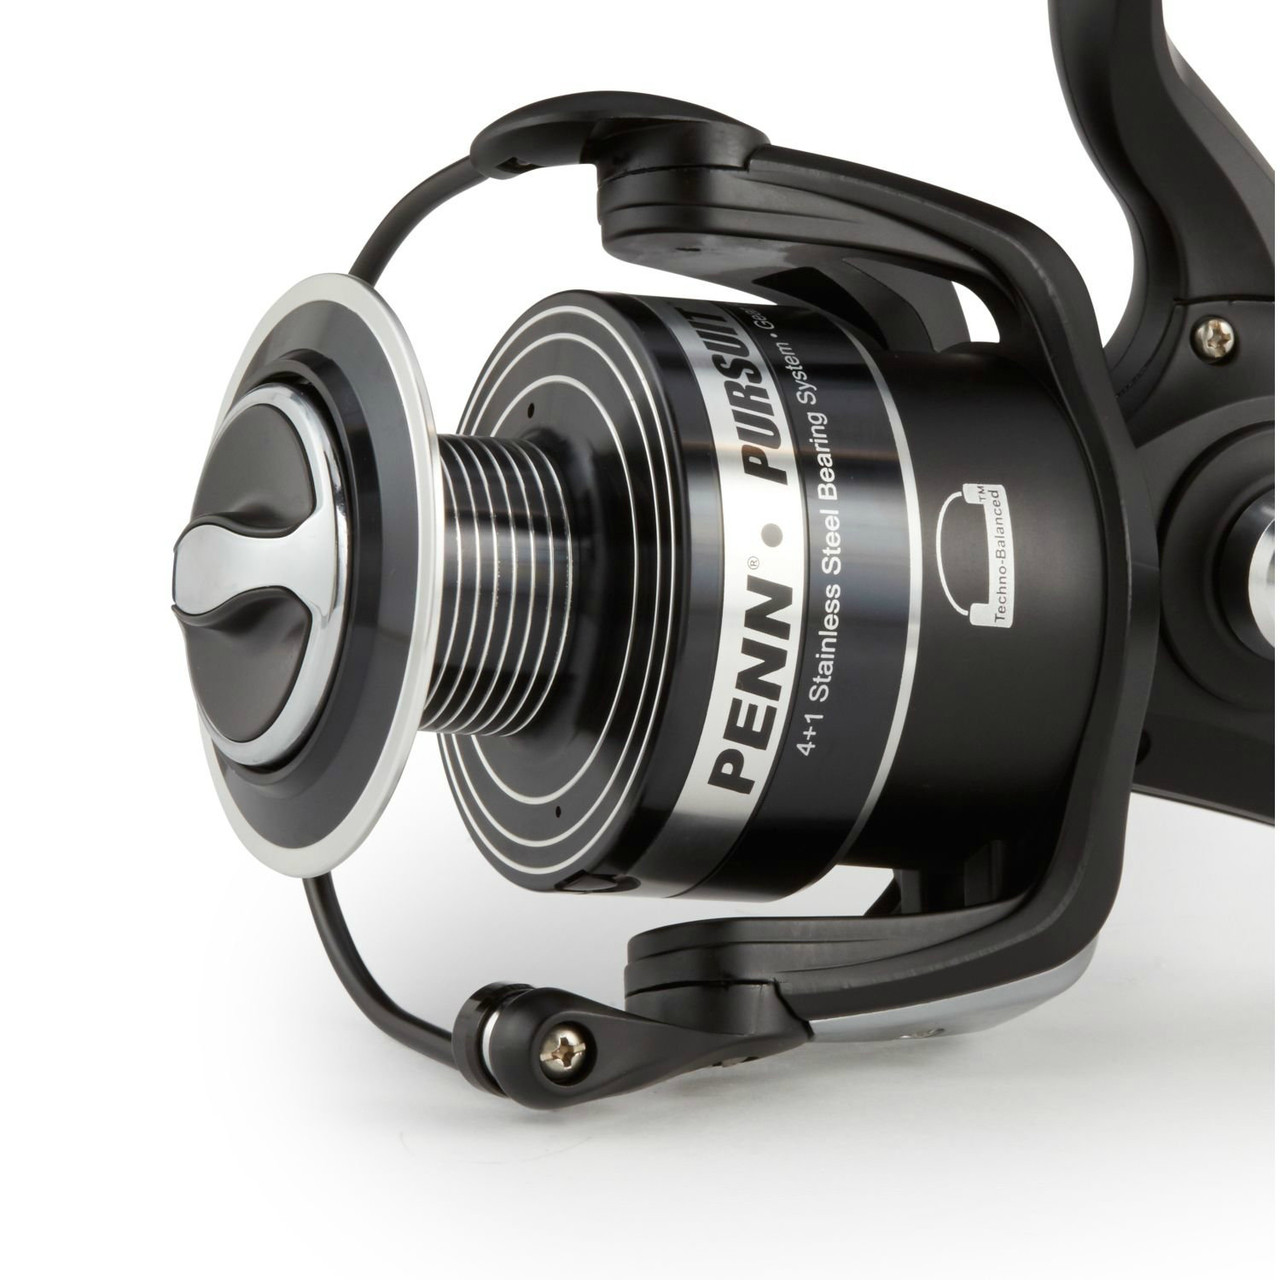 PENN Pursuit II 4000 Spinning Fishing Reel 5.2:1 Boxed (PURII4000) - Go  Outdoor Gear